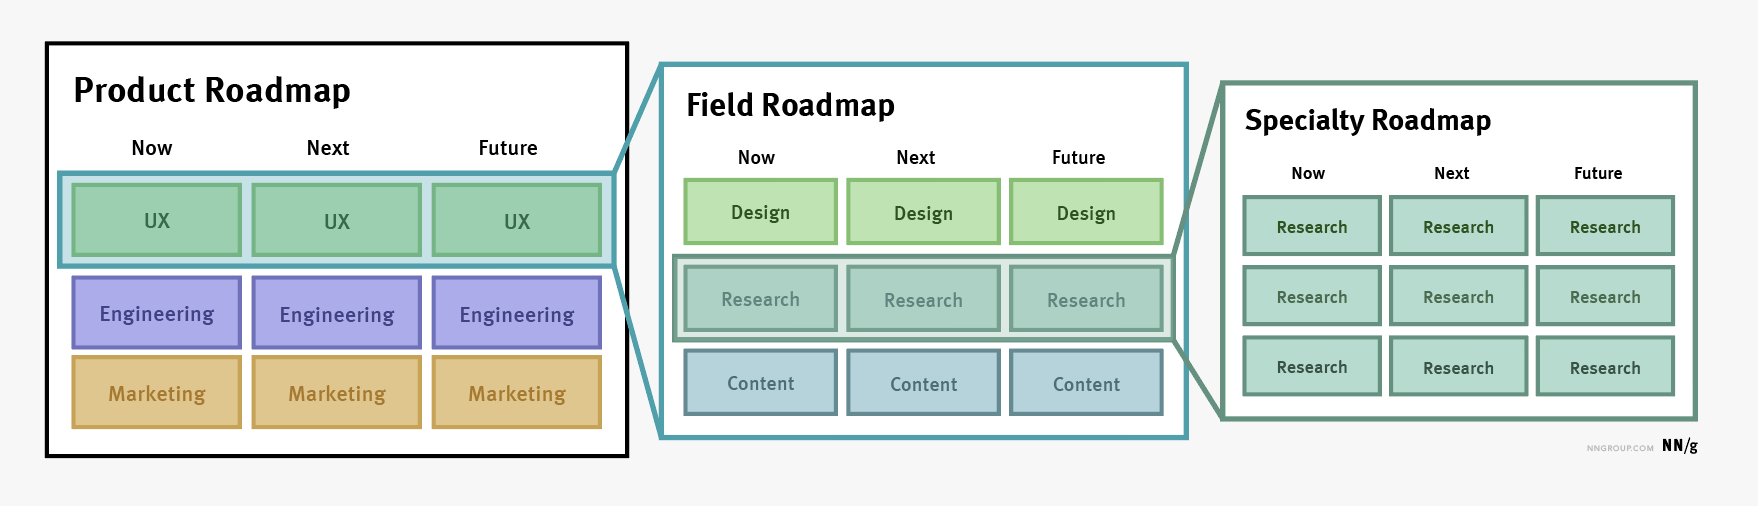 3 Types of Roadmaps: Product, Field, and Specialty 